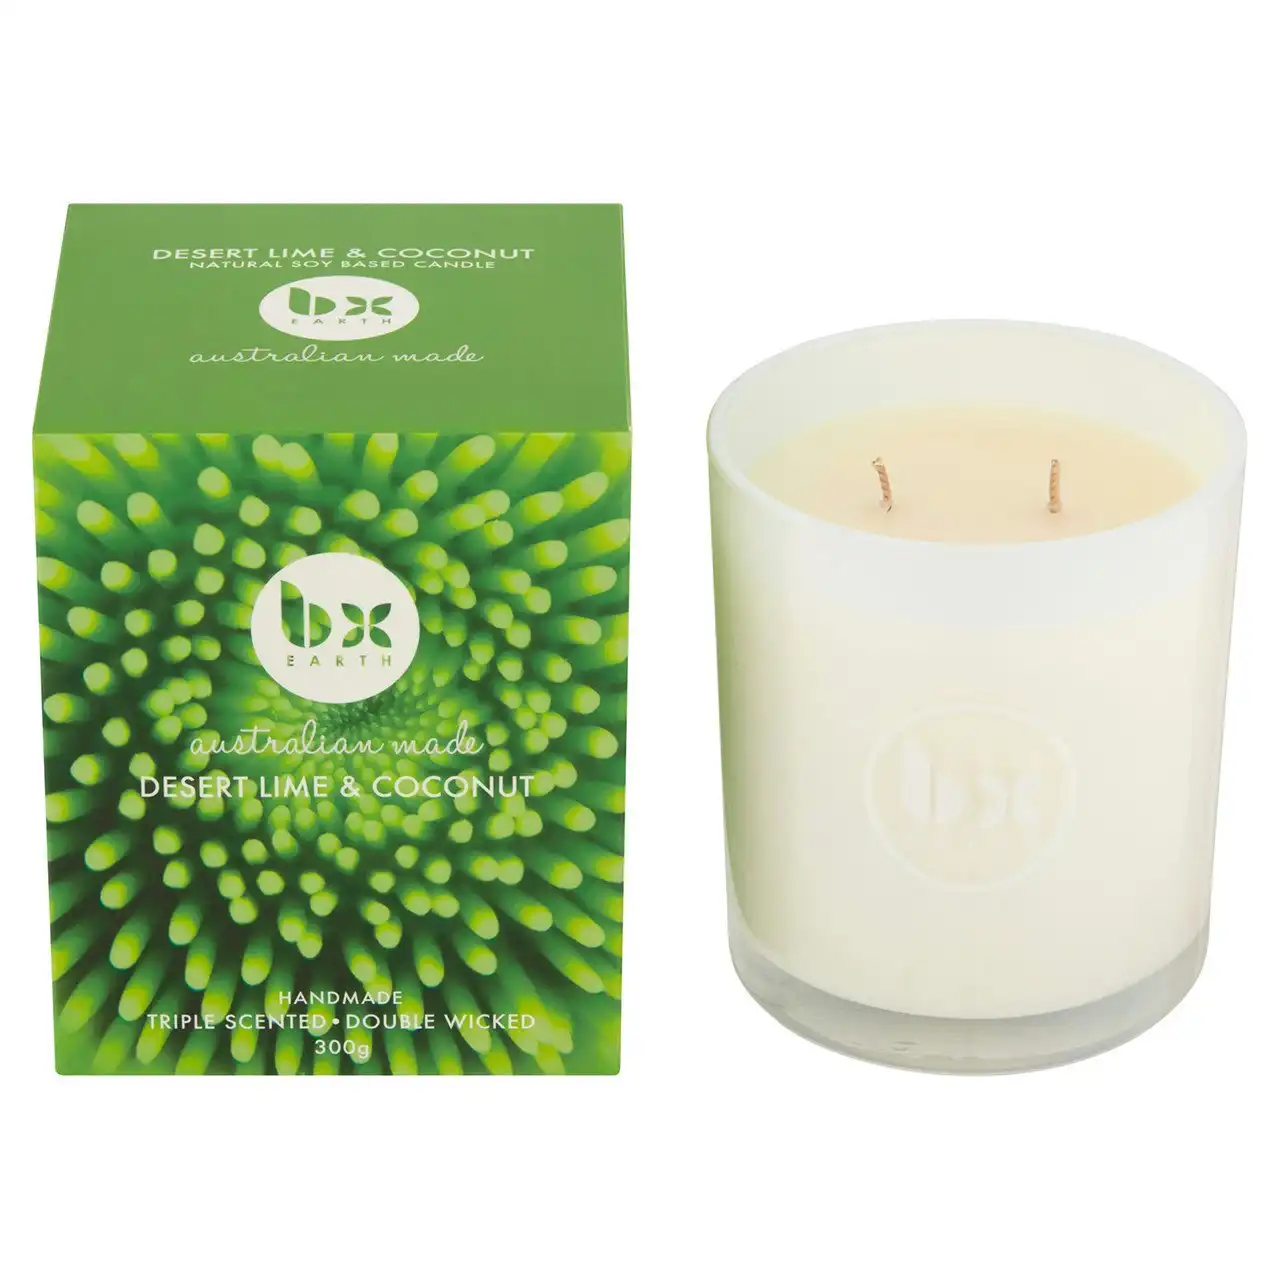 BX Earth Desert Lime & Coconut Candle 300g